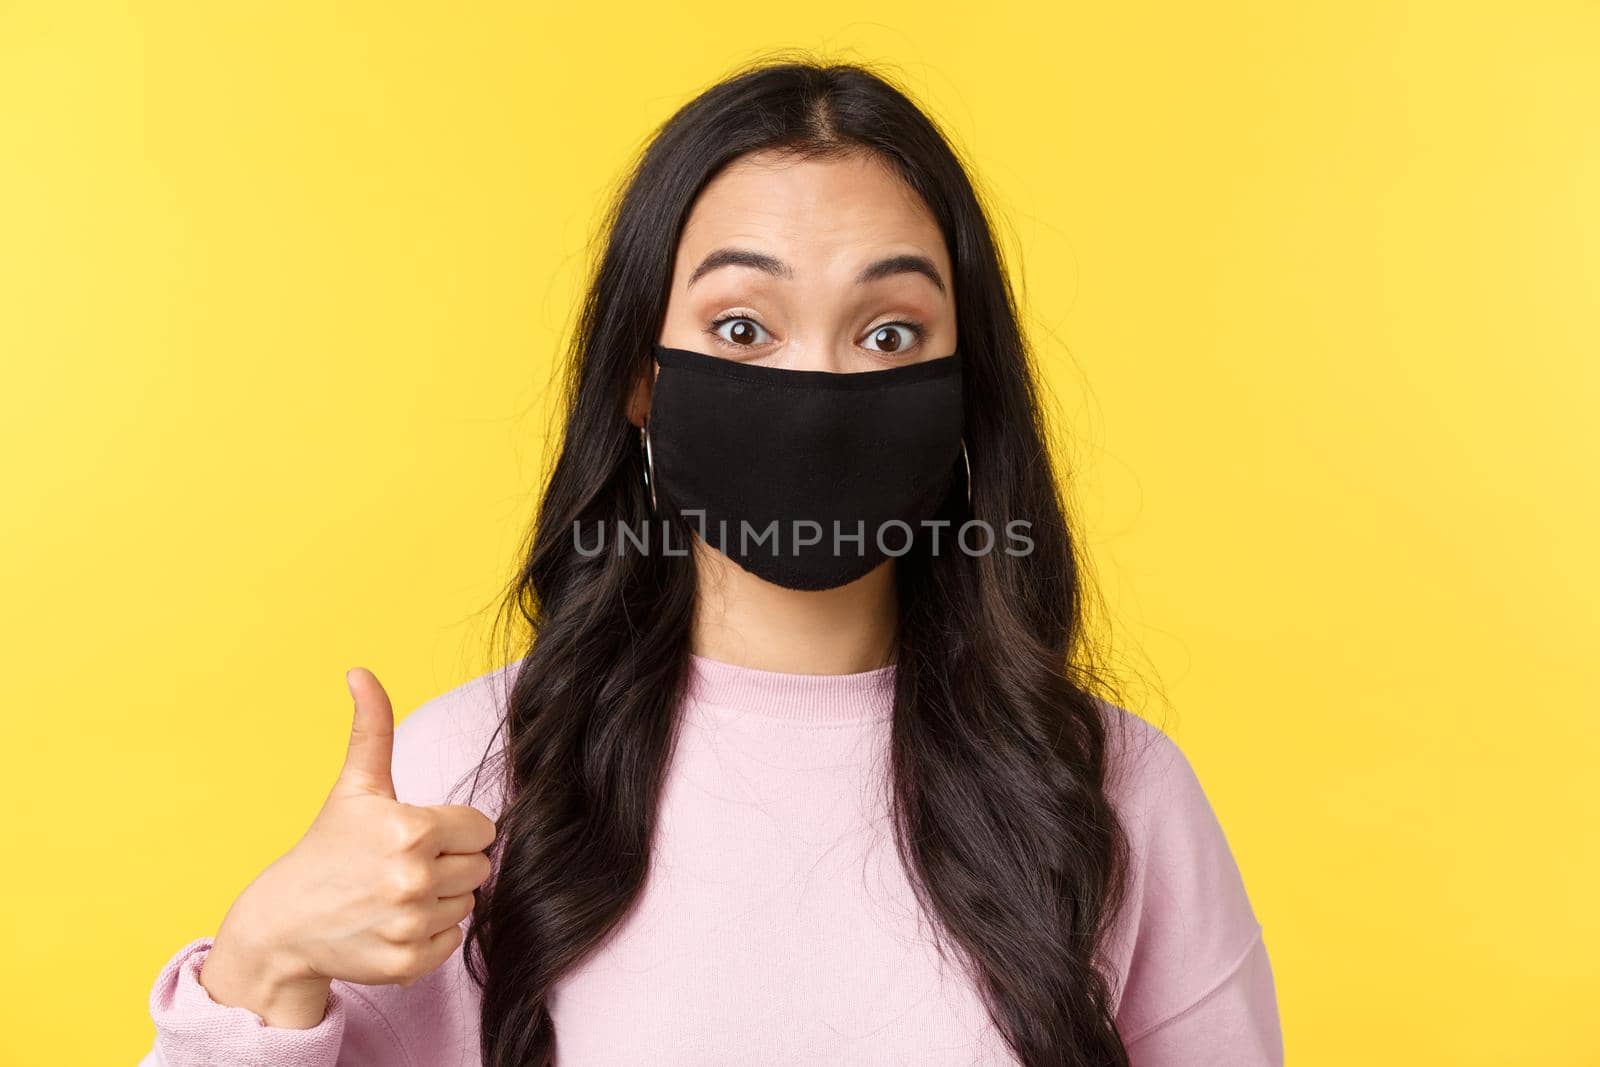 Covid-19, social-distancing lifestyle, prevent virus spread concept. Close-up of enthusiastic asian girl in face mask, look surprised and amused, showing thumbs-up in approval, yellow background.